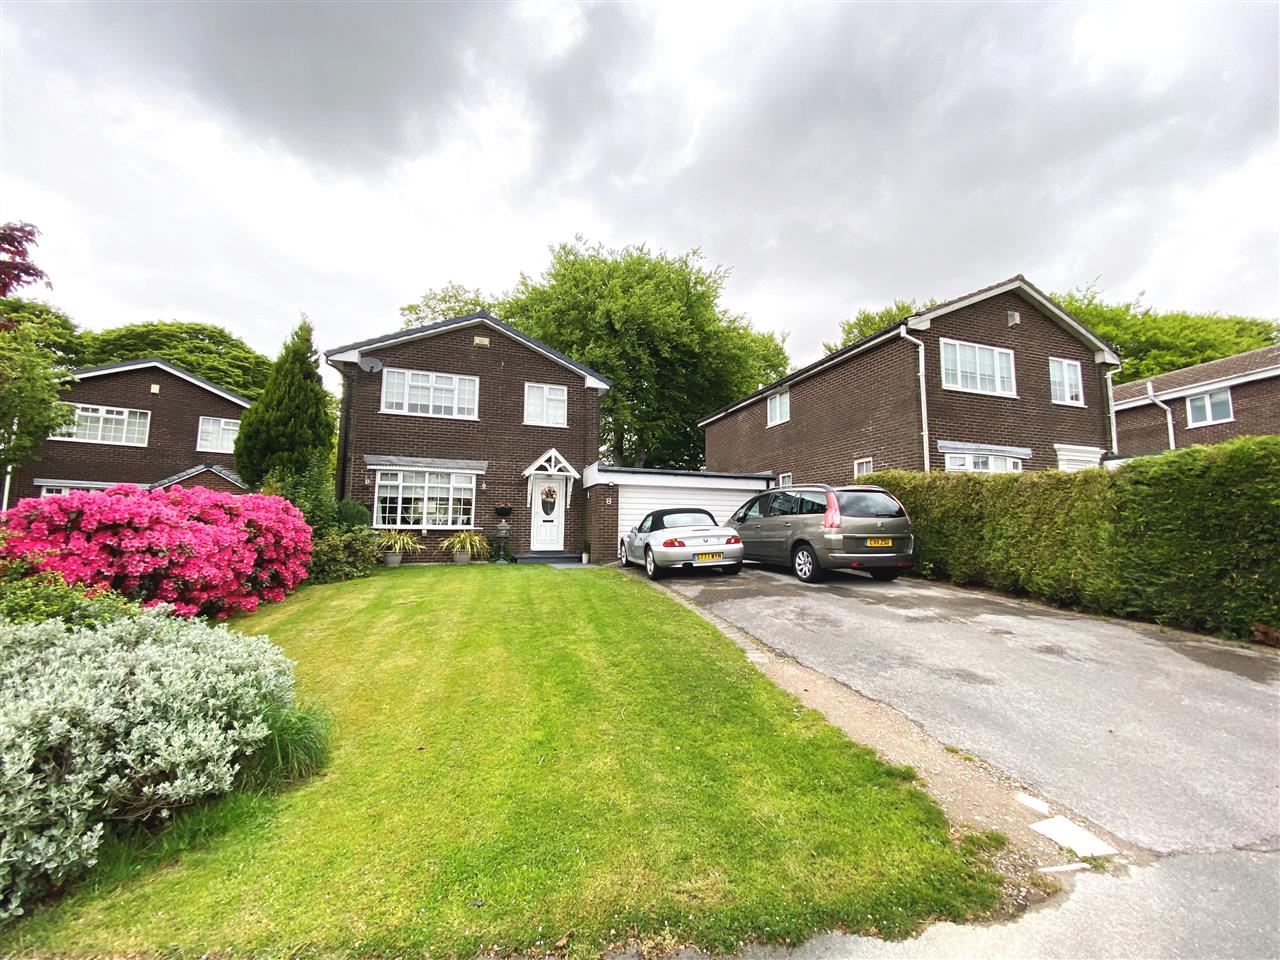 4 bed detached for sale in Ridgmont Close, Horwich, BL6